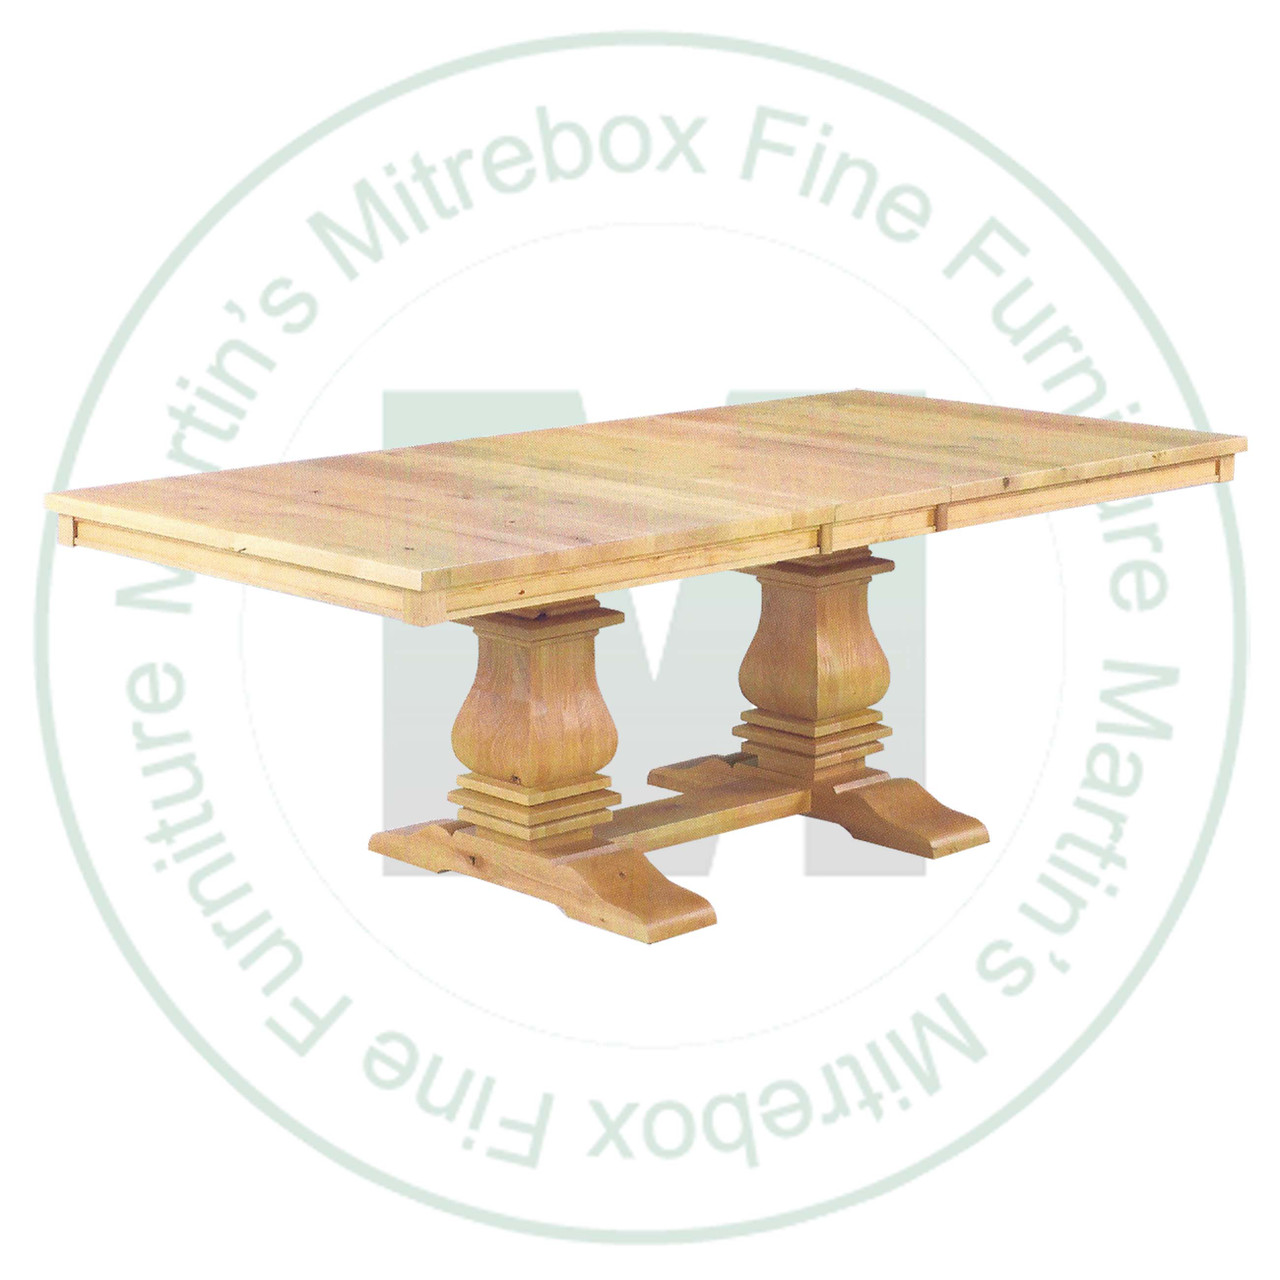 Oak Mediterranean Double Pedestal Table 48''D x 84''W x 30''H With 4 - 12'' Leaves. Table Has 1.25'' Thick Top